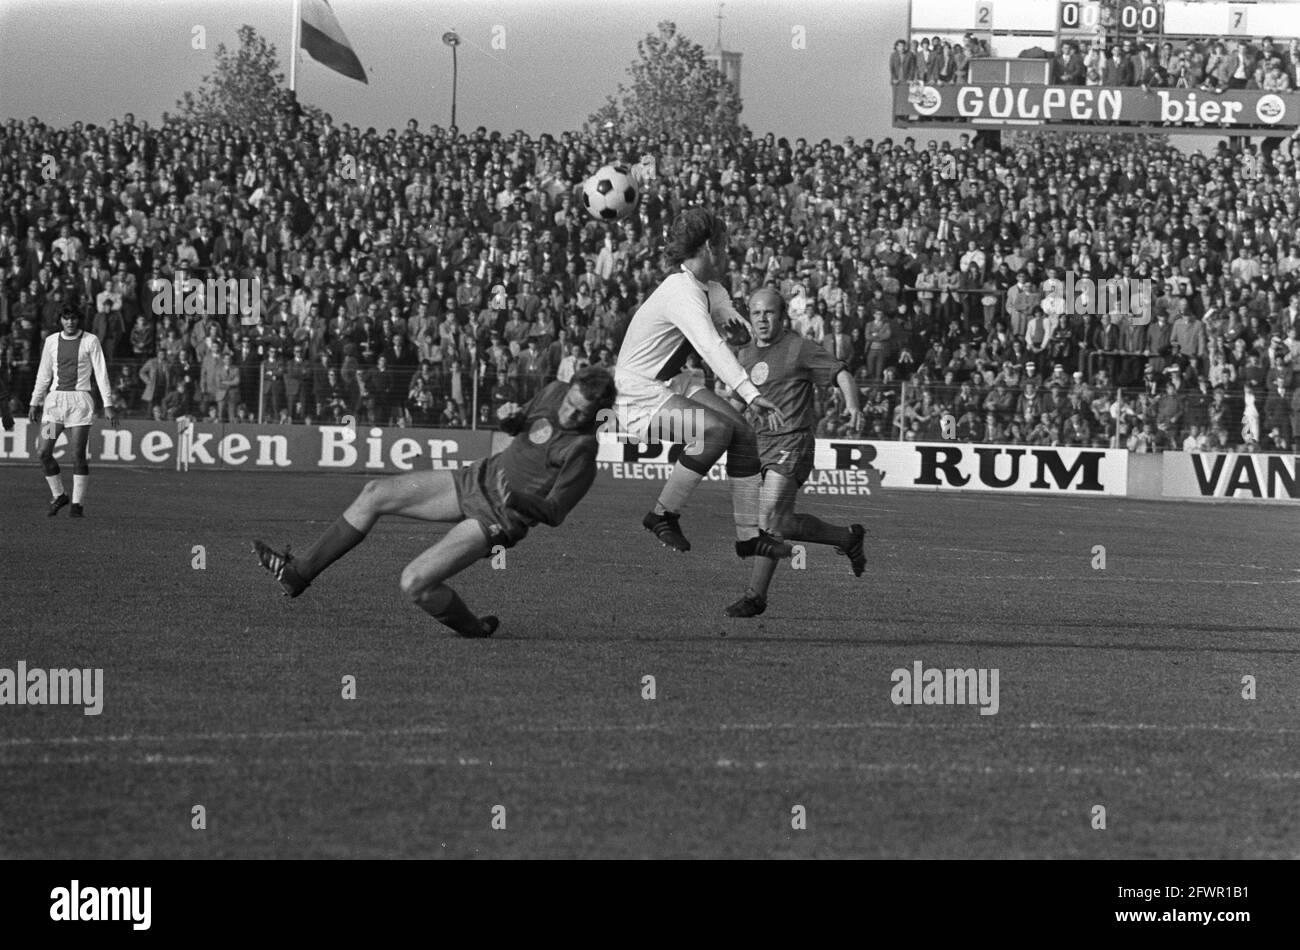 MVV against Ajax 3-0, action, 31 October 1971, sports, soccer, The Netherlands, 20th century press agency photo, news to remember, documentary, historic photography 1945-1990, visual stories, human history of the Twentieth Century, capturing moments in time Stock Photo